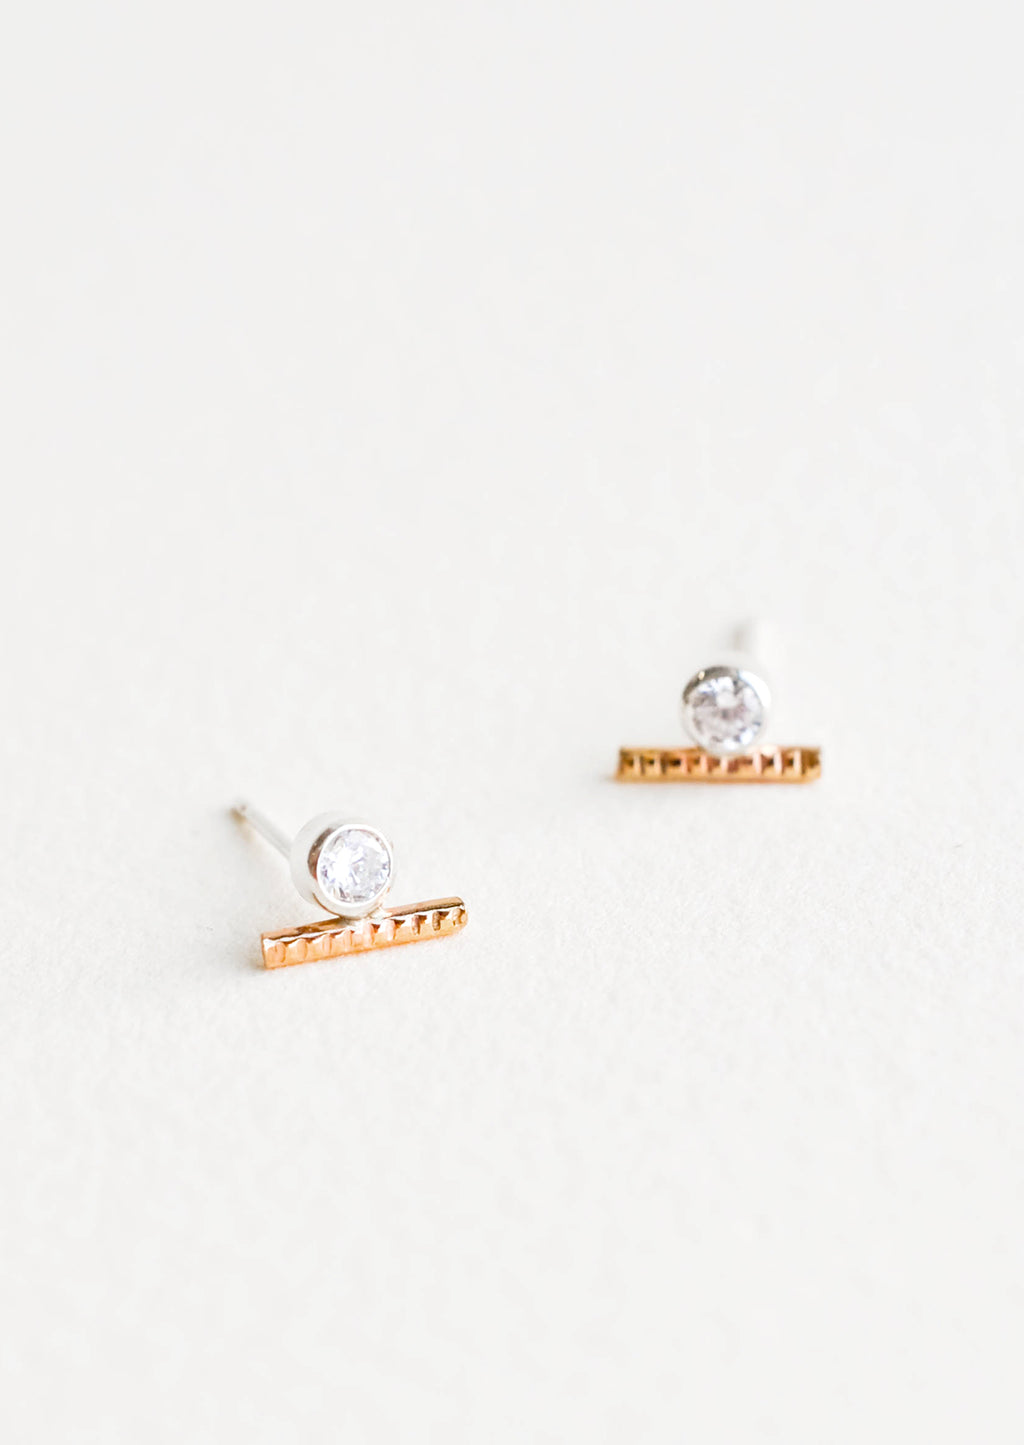 1: Stud earrings with a round white crystal set in a silver, attached to a short textured gold bar.